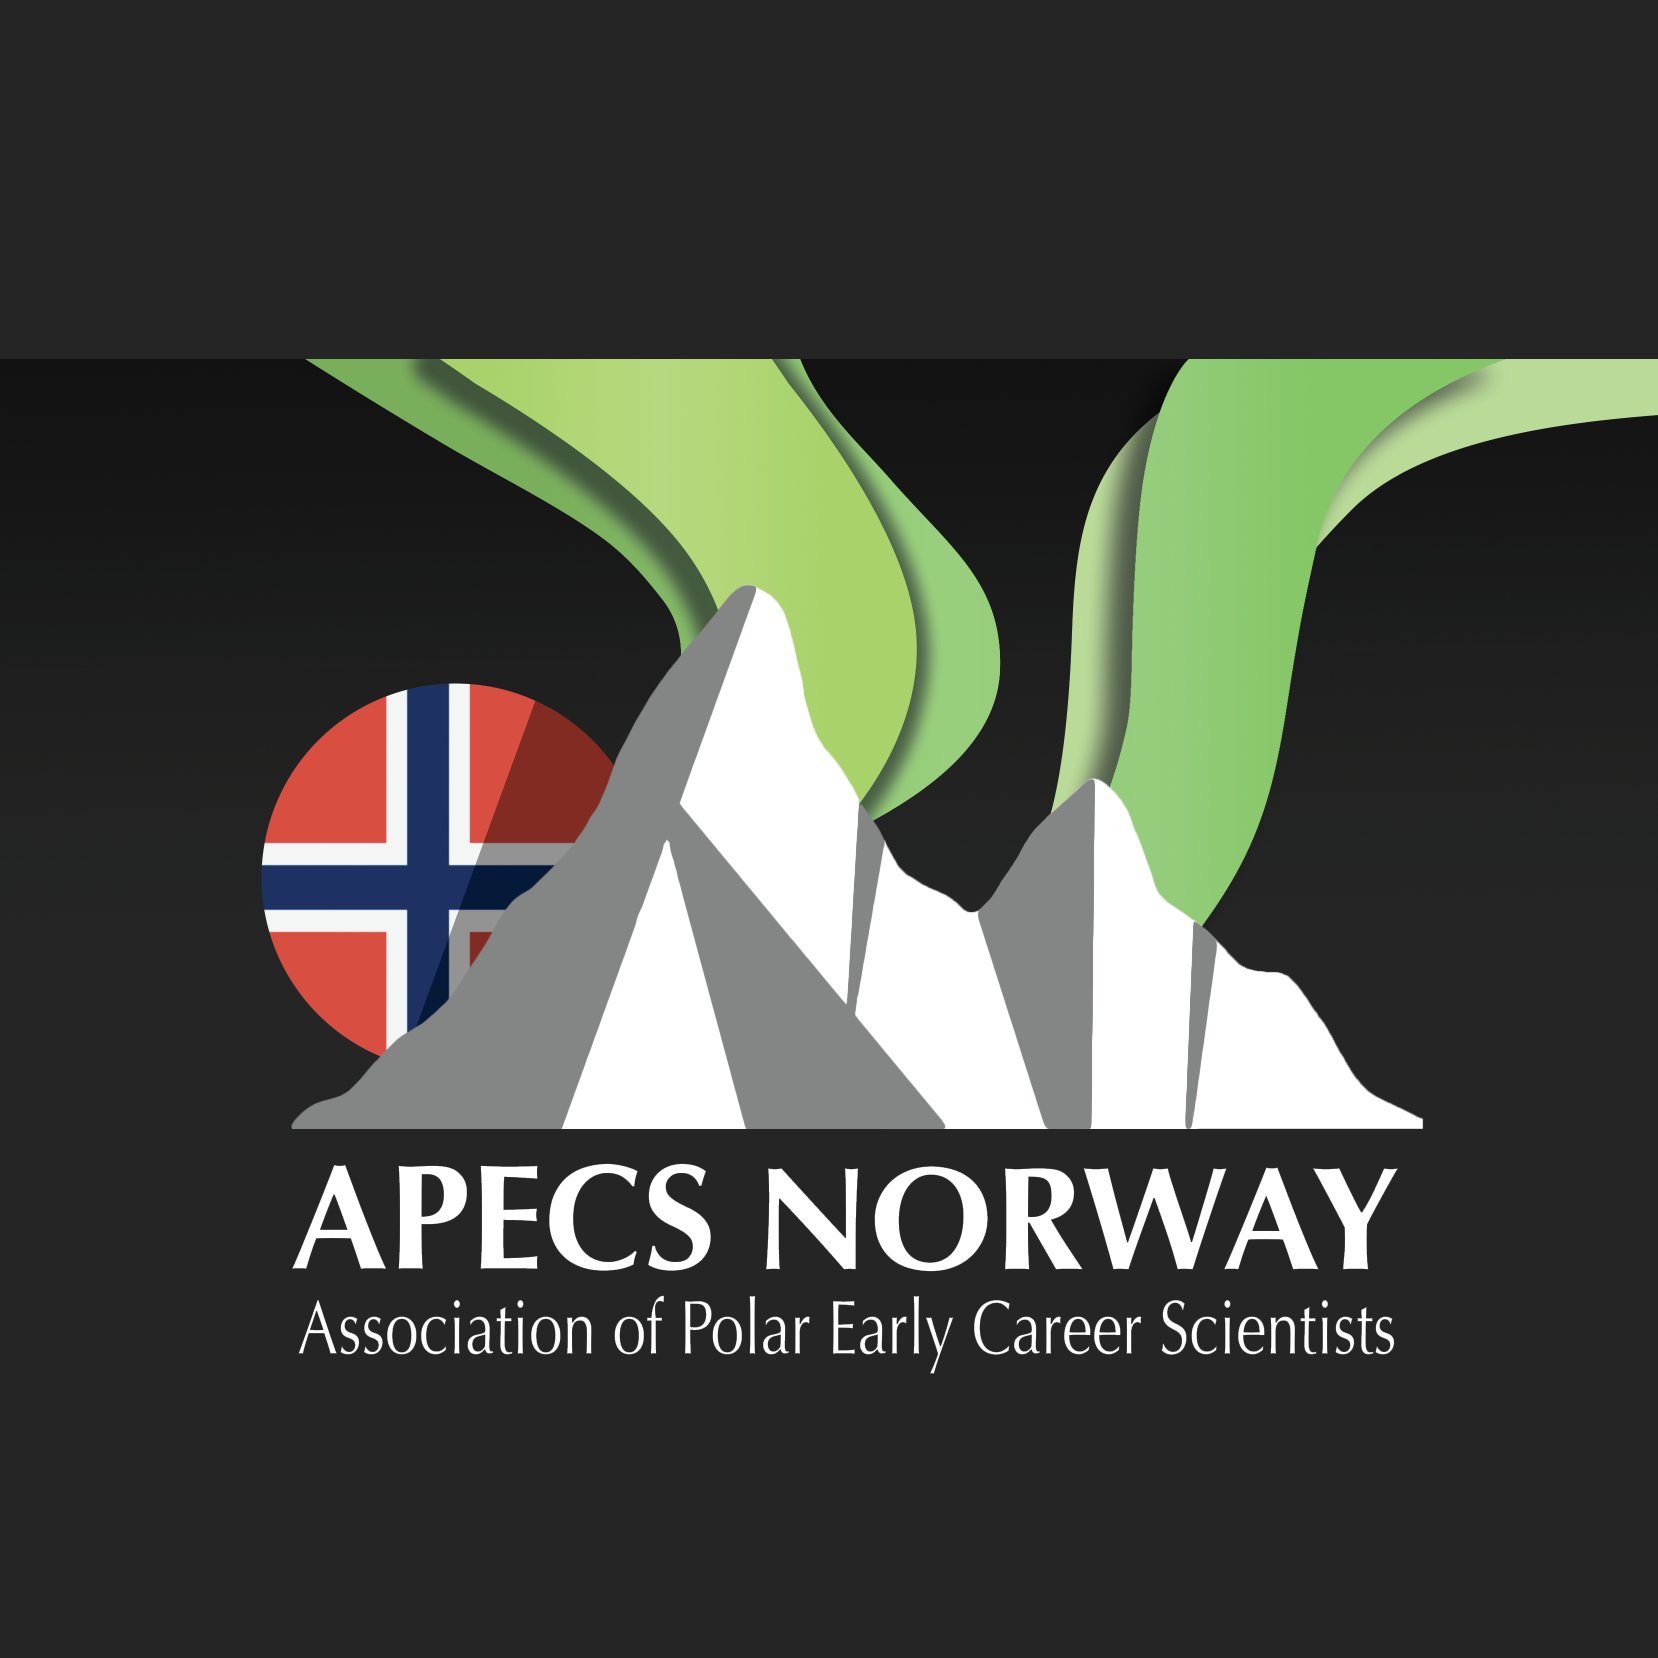 We are the Norwegian National Committee of @polar_research. Our aim is to create a vibrant polar Early Career Researcher (ECR) community in Norway.